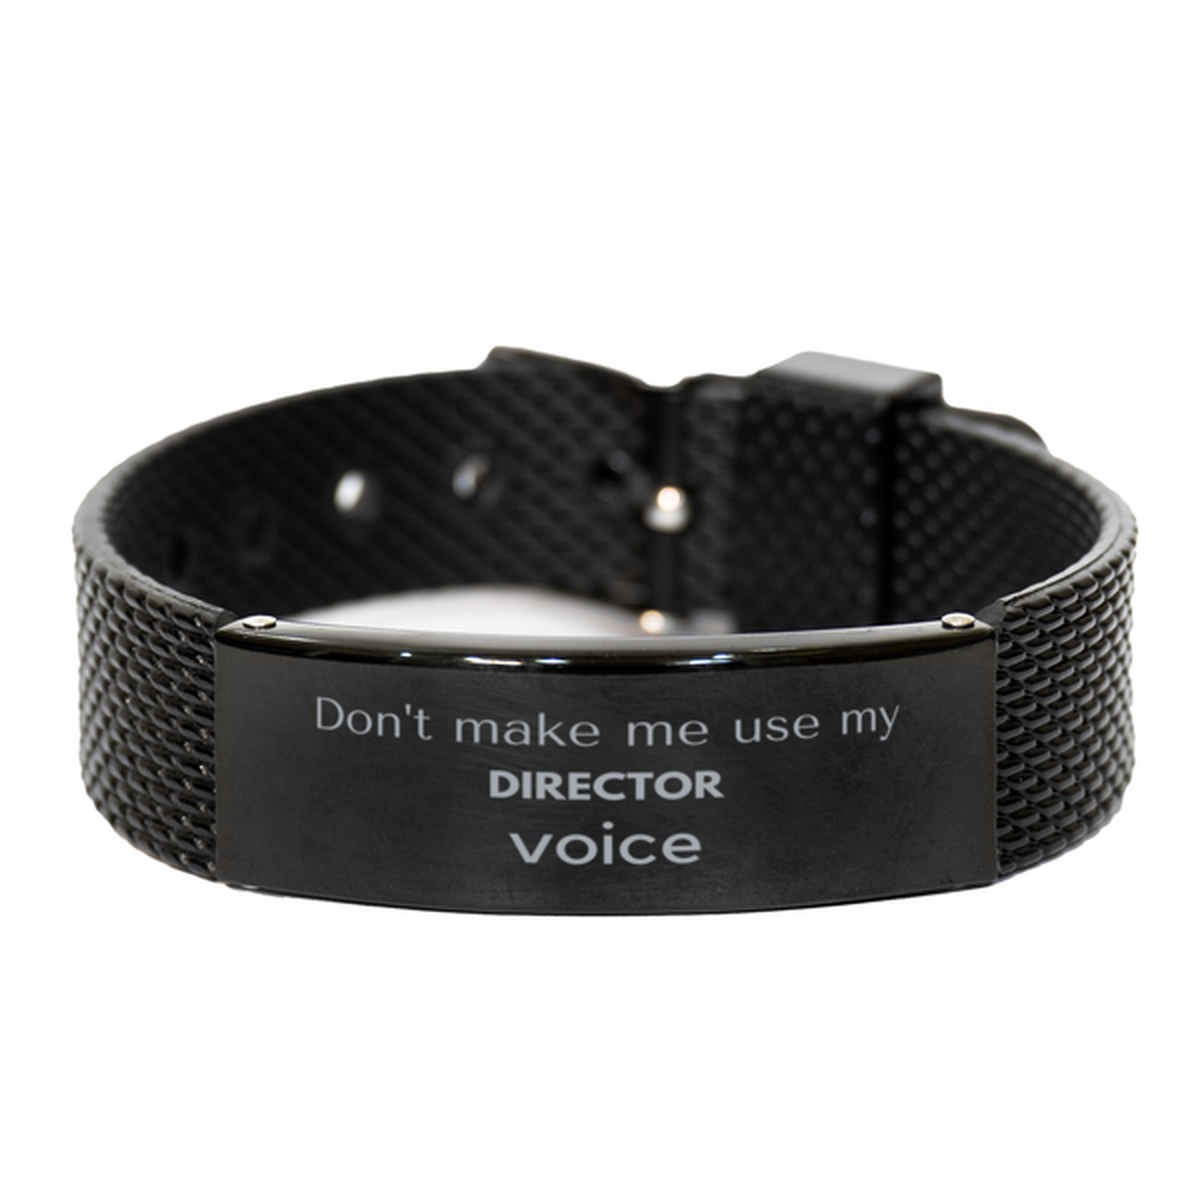 Don't make me use my Director voice, Sarcasm Director Gifts, Christmas Director Black Shark Mesh Bracelet Birthday Unique Gifts For Director Coworkers, Men, Women, Colleague, Friends